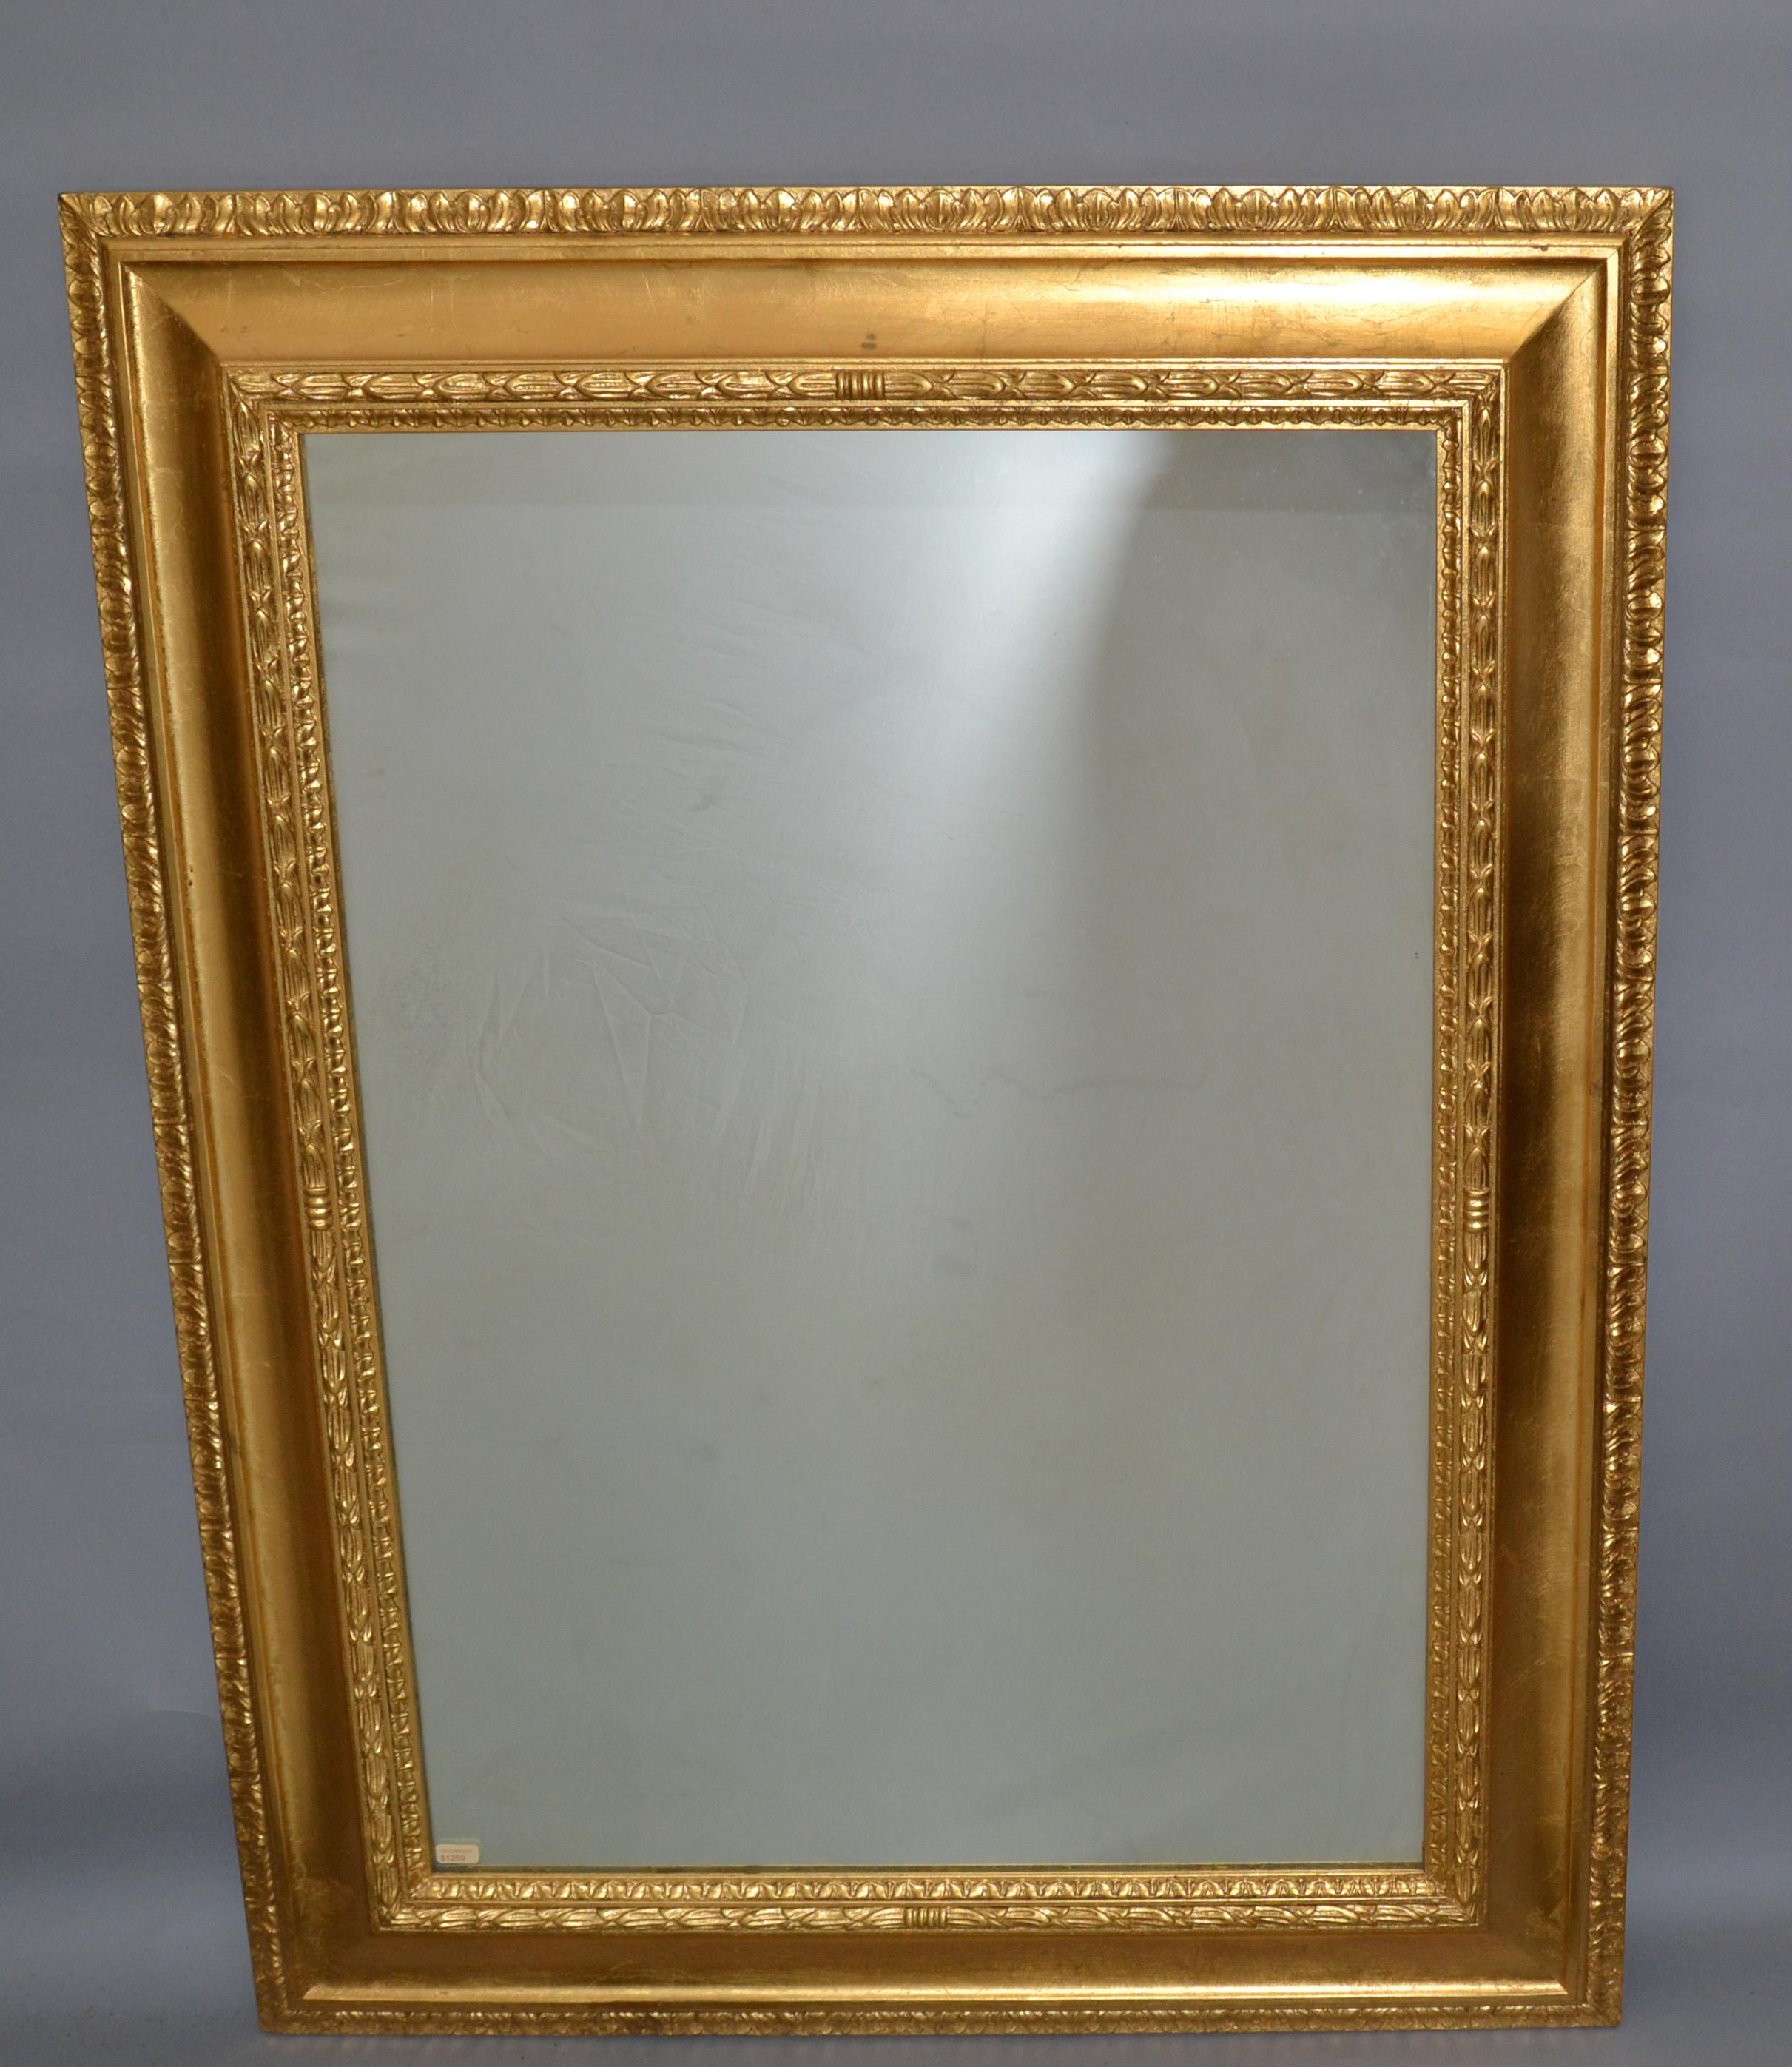 Italian Neoclassical Regency Rectangle Gilded Wall Mirror, 1930s For Sale 7